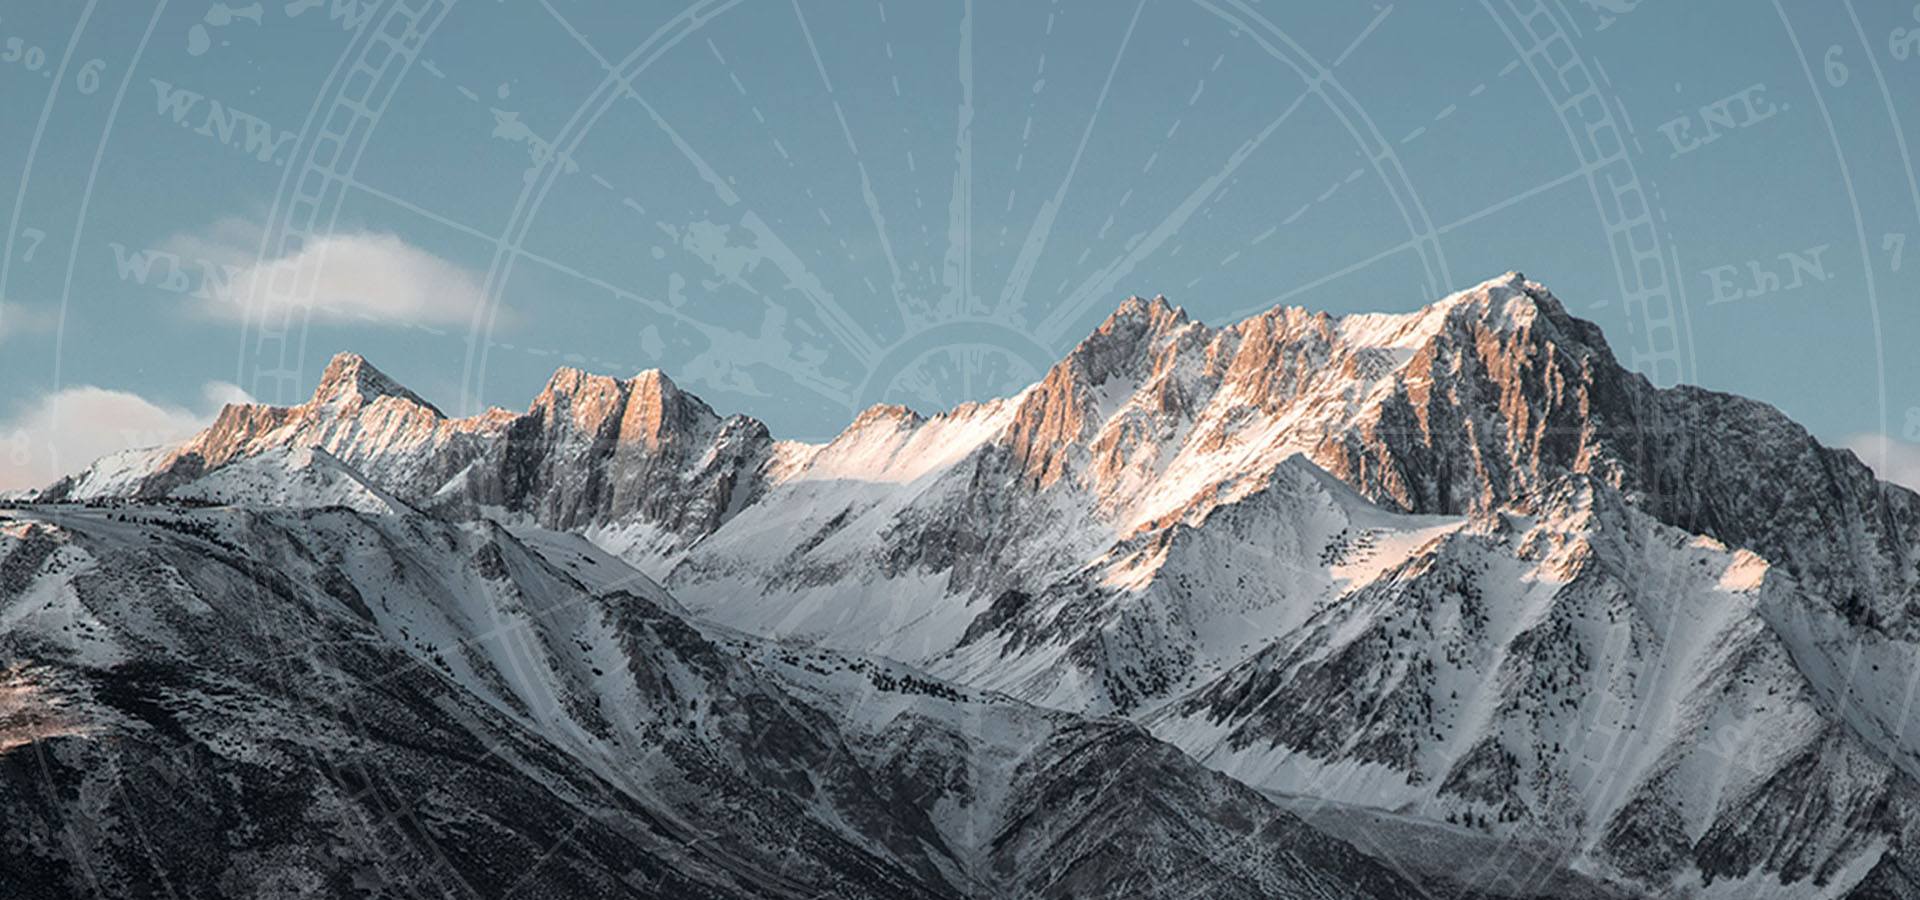 Mountains with compass overlayed